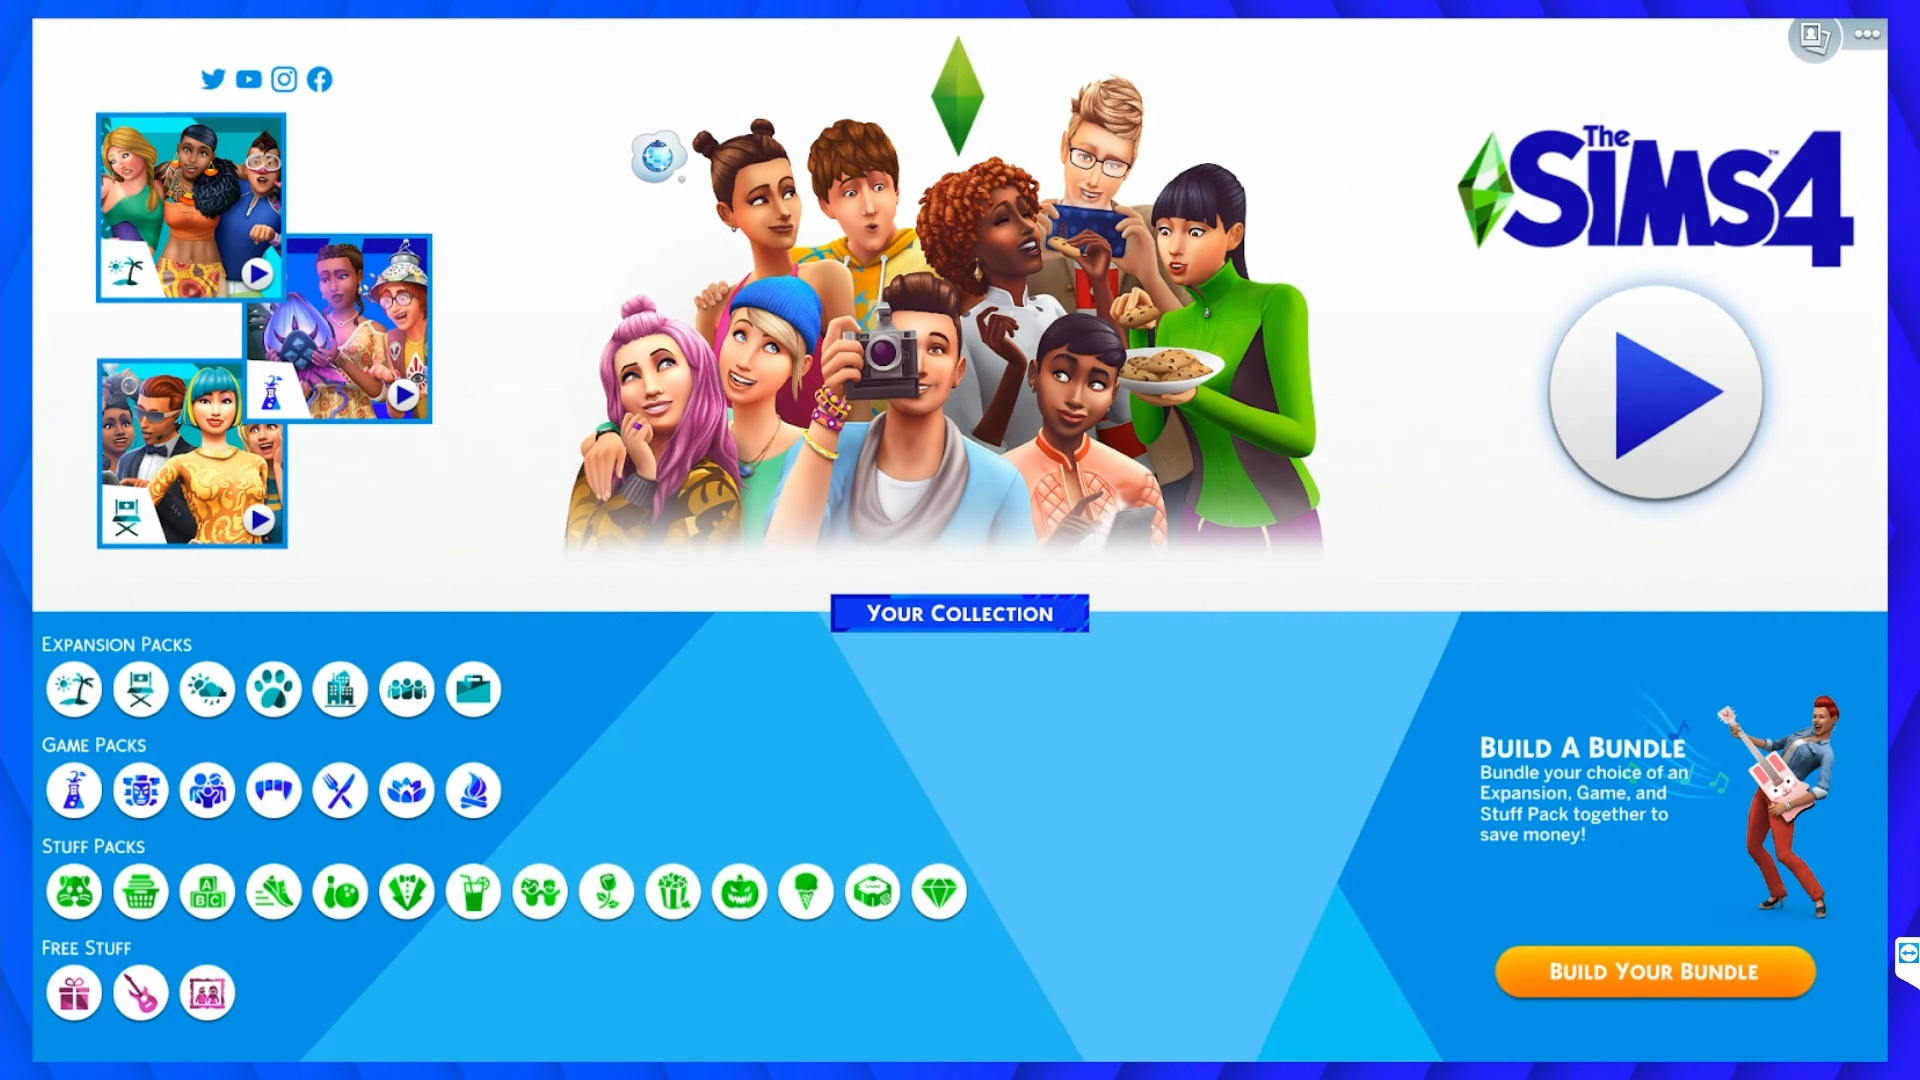 The Sims 3: Base Game All Expansions All Stuff Packs [FULL] Serial Key